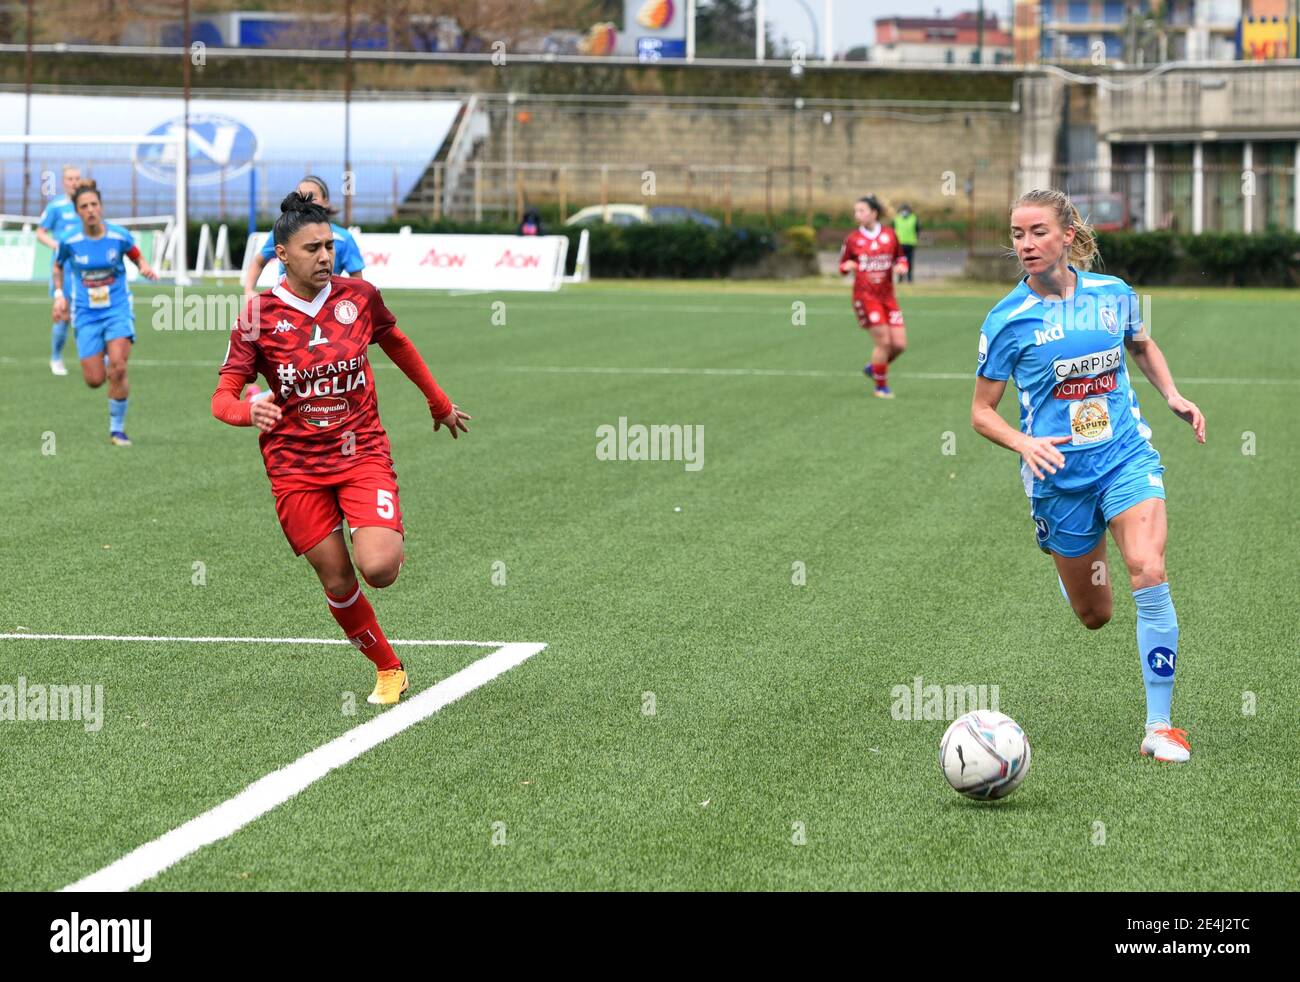 Italy. 23rd Jan, 2021. Jenny Hjohlman in action during in the match of Serie A Female, the Italian Woman League Football at “Caduti di Brema” stadium of Naples, on the field Napoli vs Bari, Napoli won the match 1-0. (Photo by Pasquale Gargano/Pacific Press) Credit: Pacific Press Media Production Corp./Alamy Live News Stock Photo